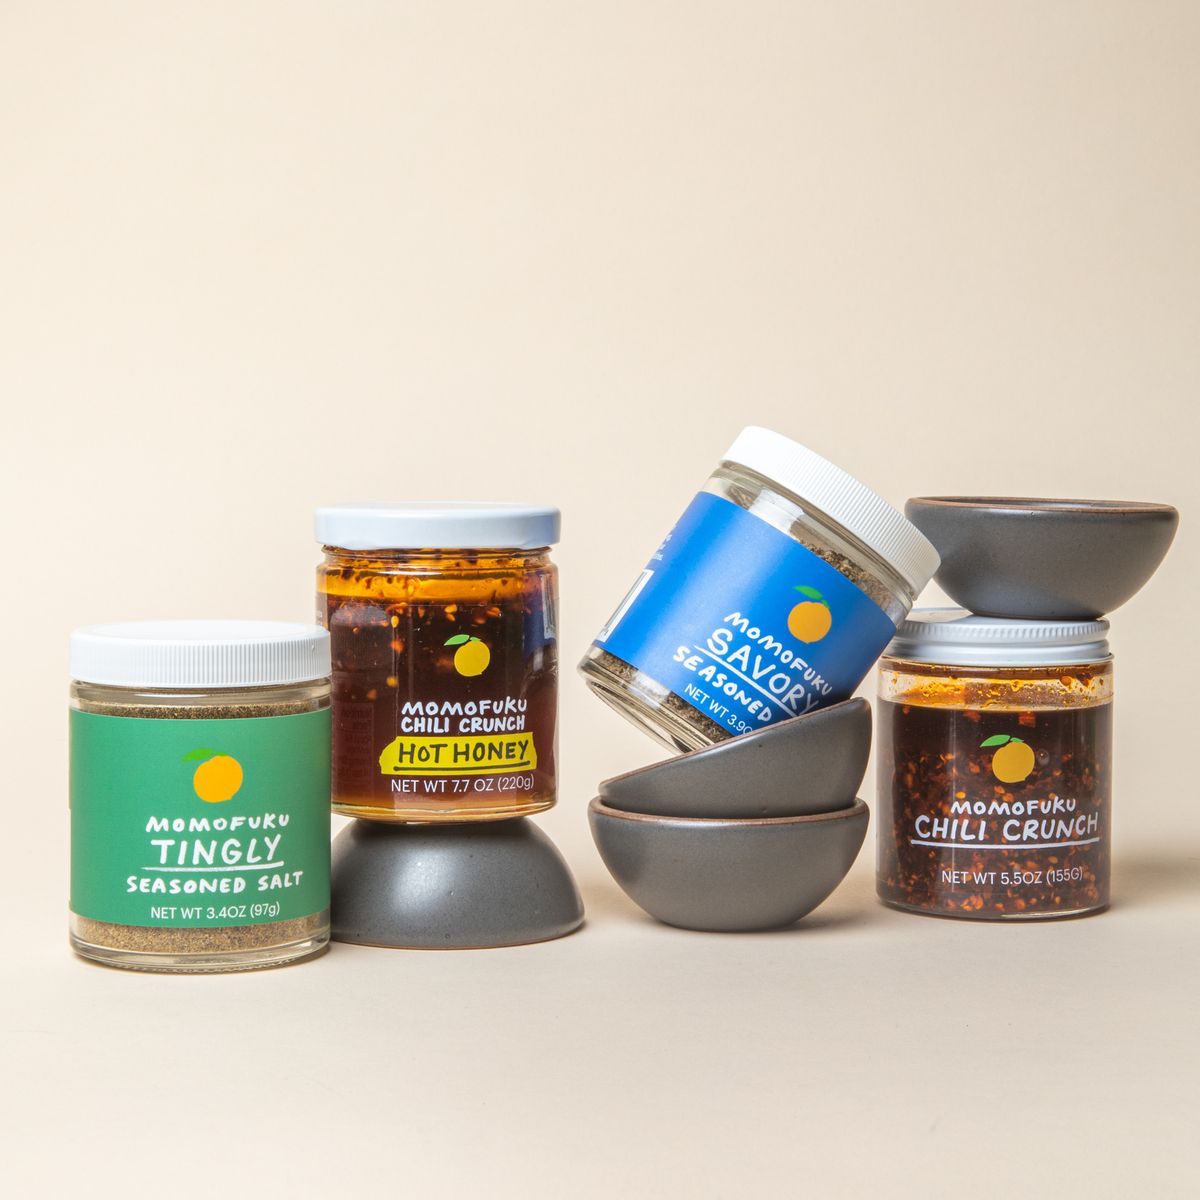 4 little ceramic bowls in a soft cool grey color surrounded by 4 jars of Momofuku seasoned salts and chili crunch.